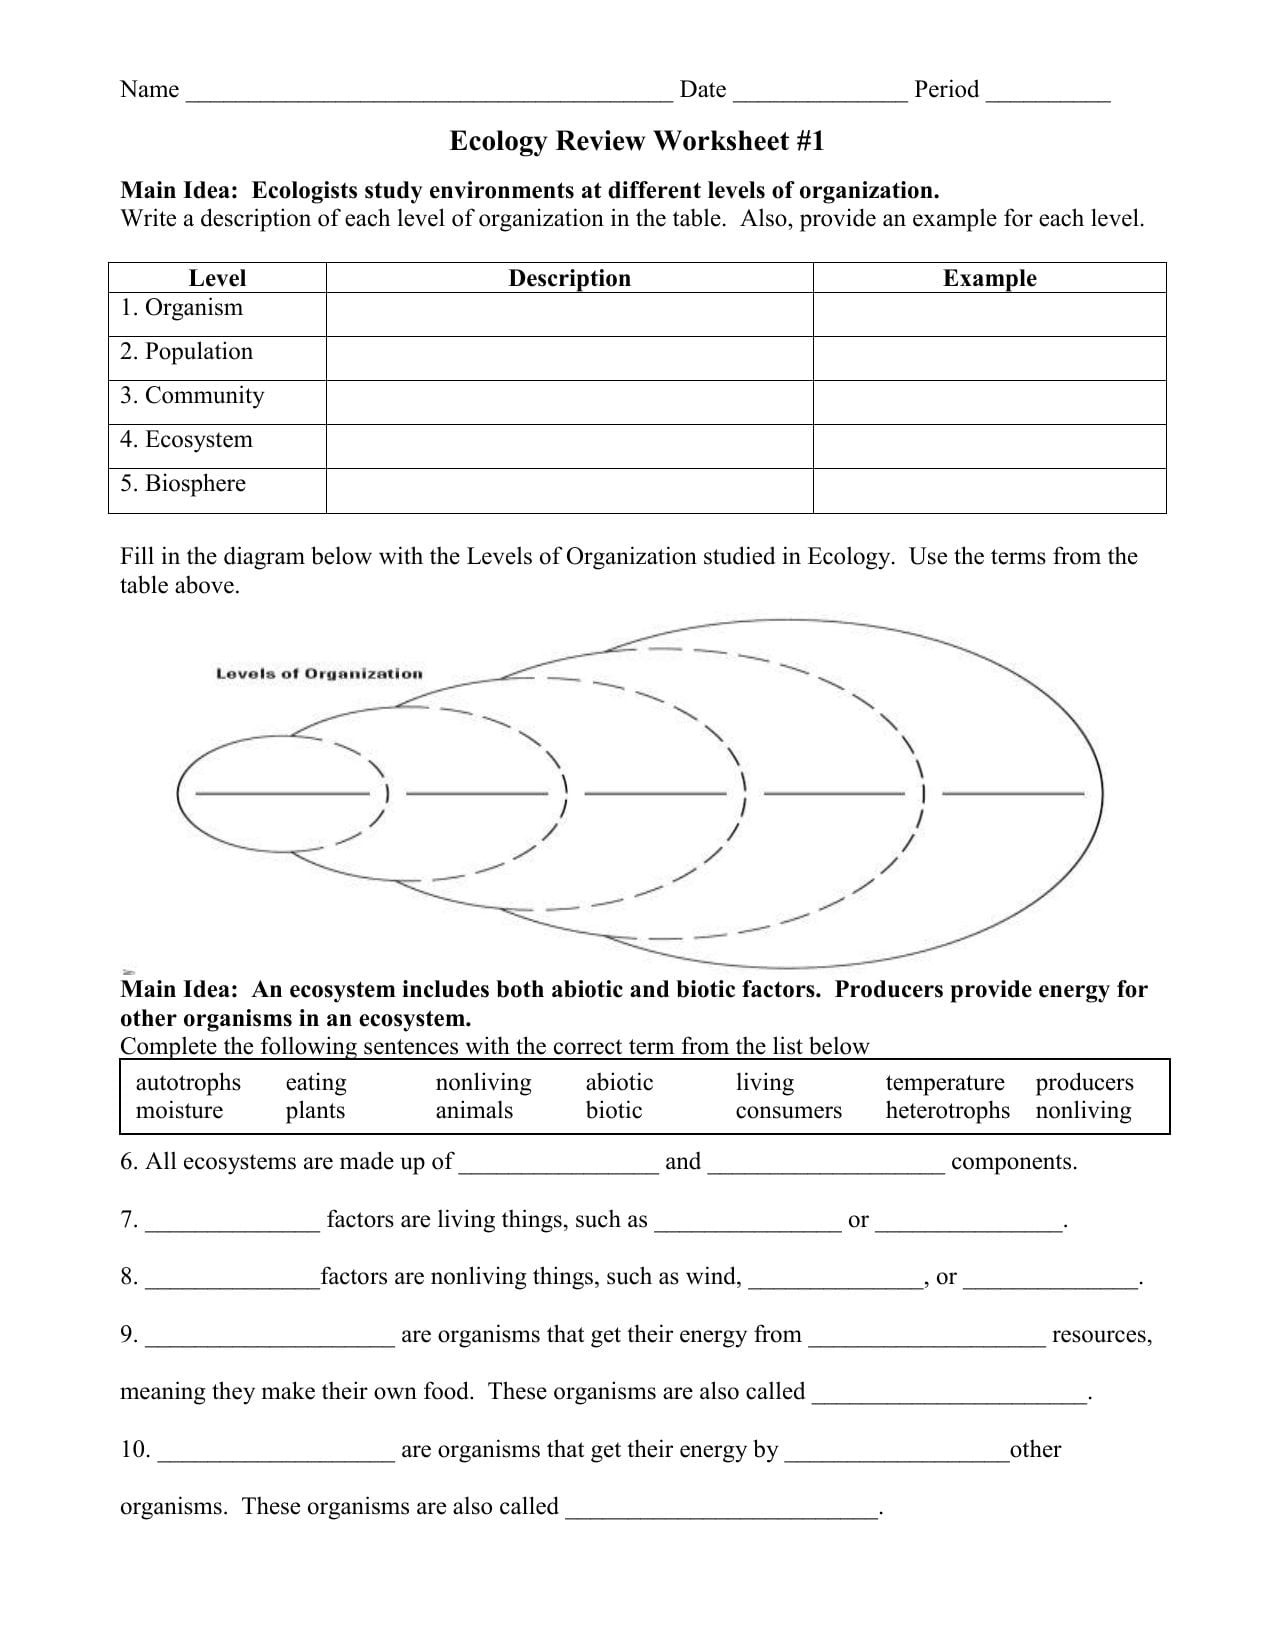 Ecology Review Worksheet 1 Avoiding Trouble Worksheets